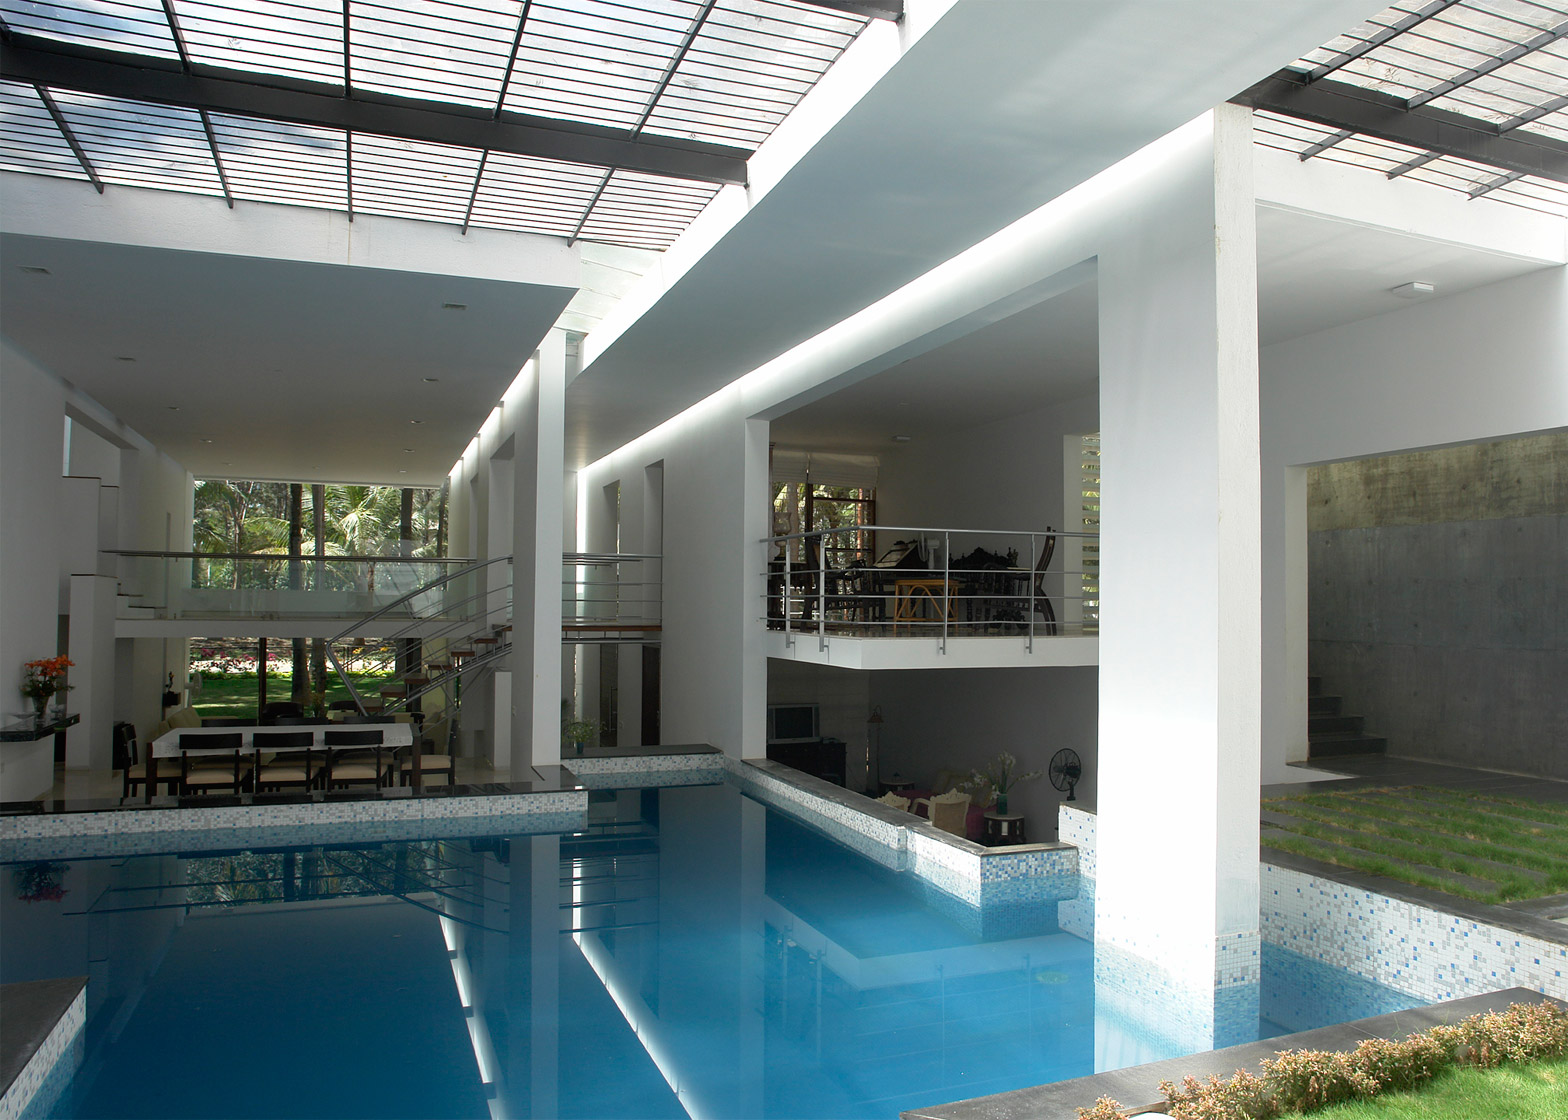 House By Ochre Has Skylit Swimming Pool